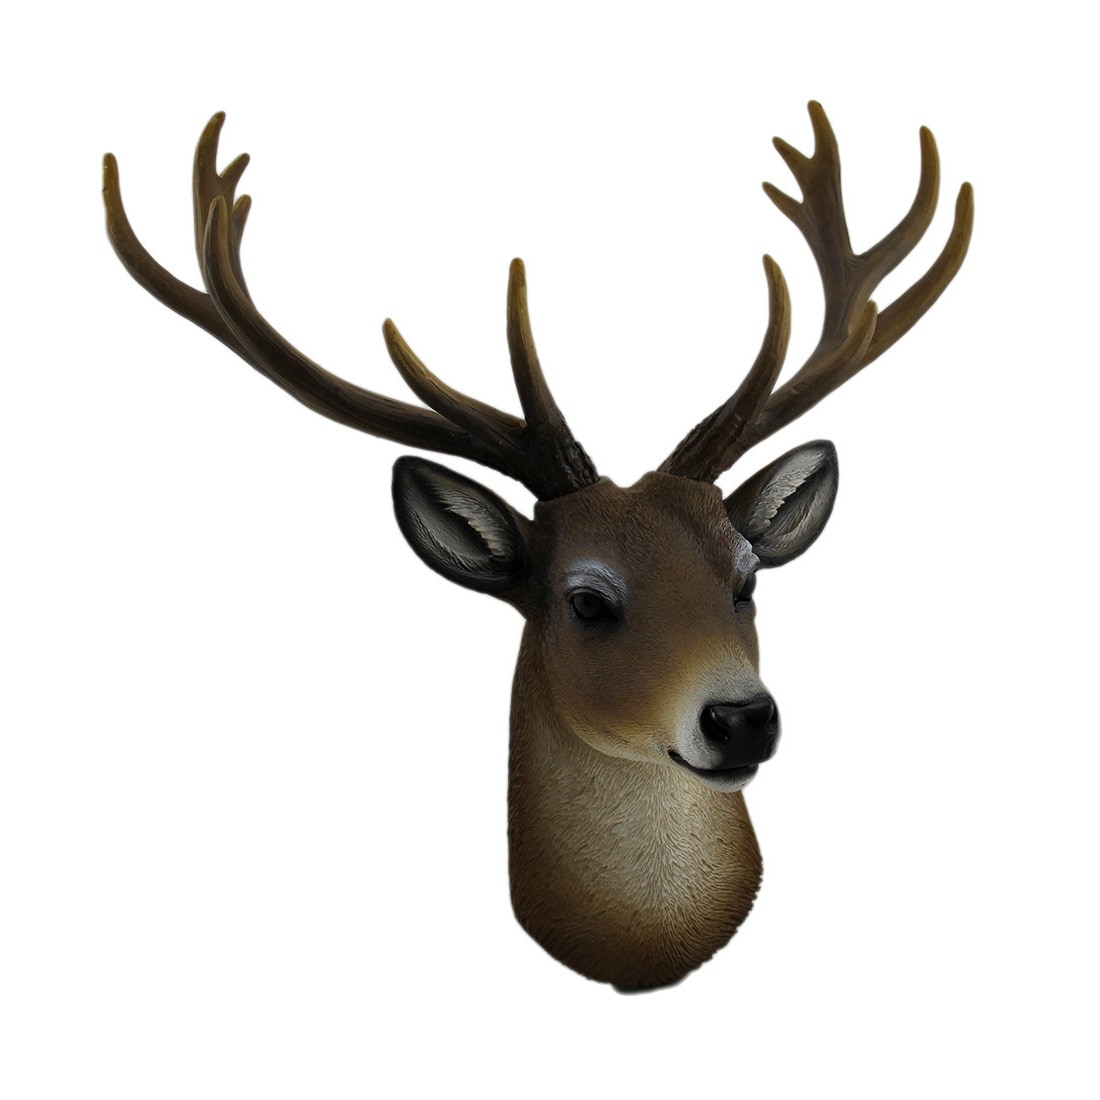 Faux Deer Antler Wall Trophy // White with Natural Antlers